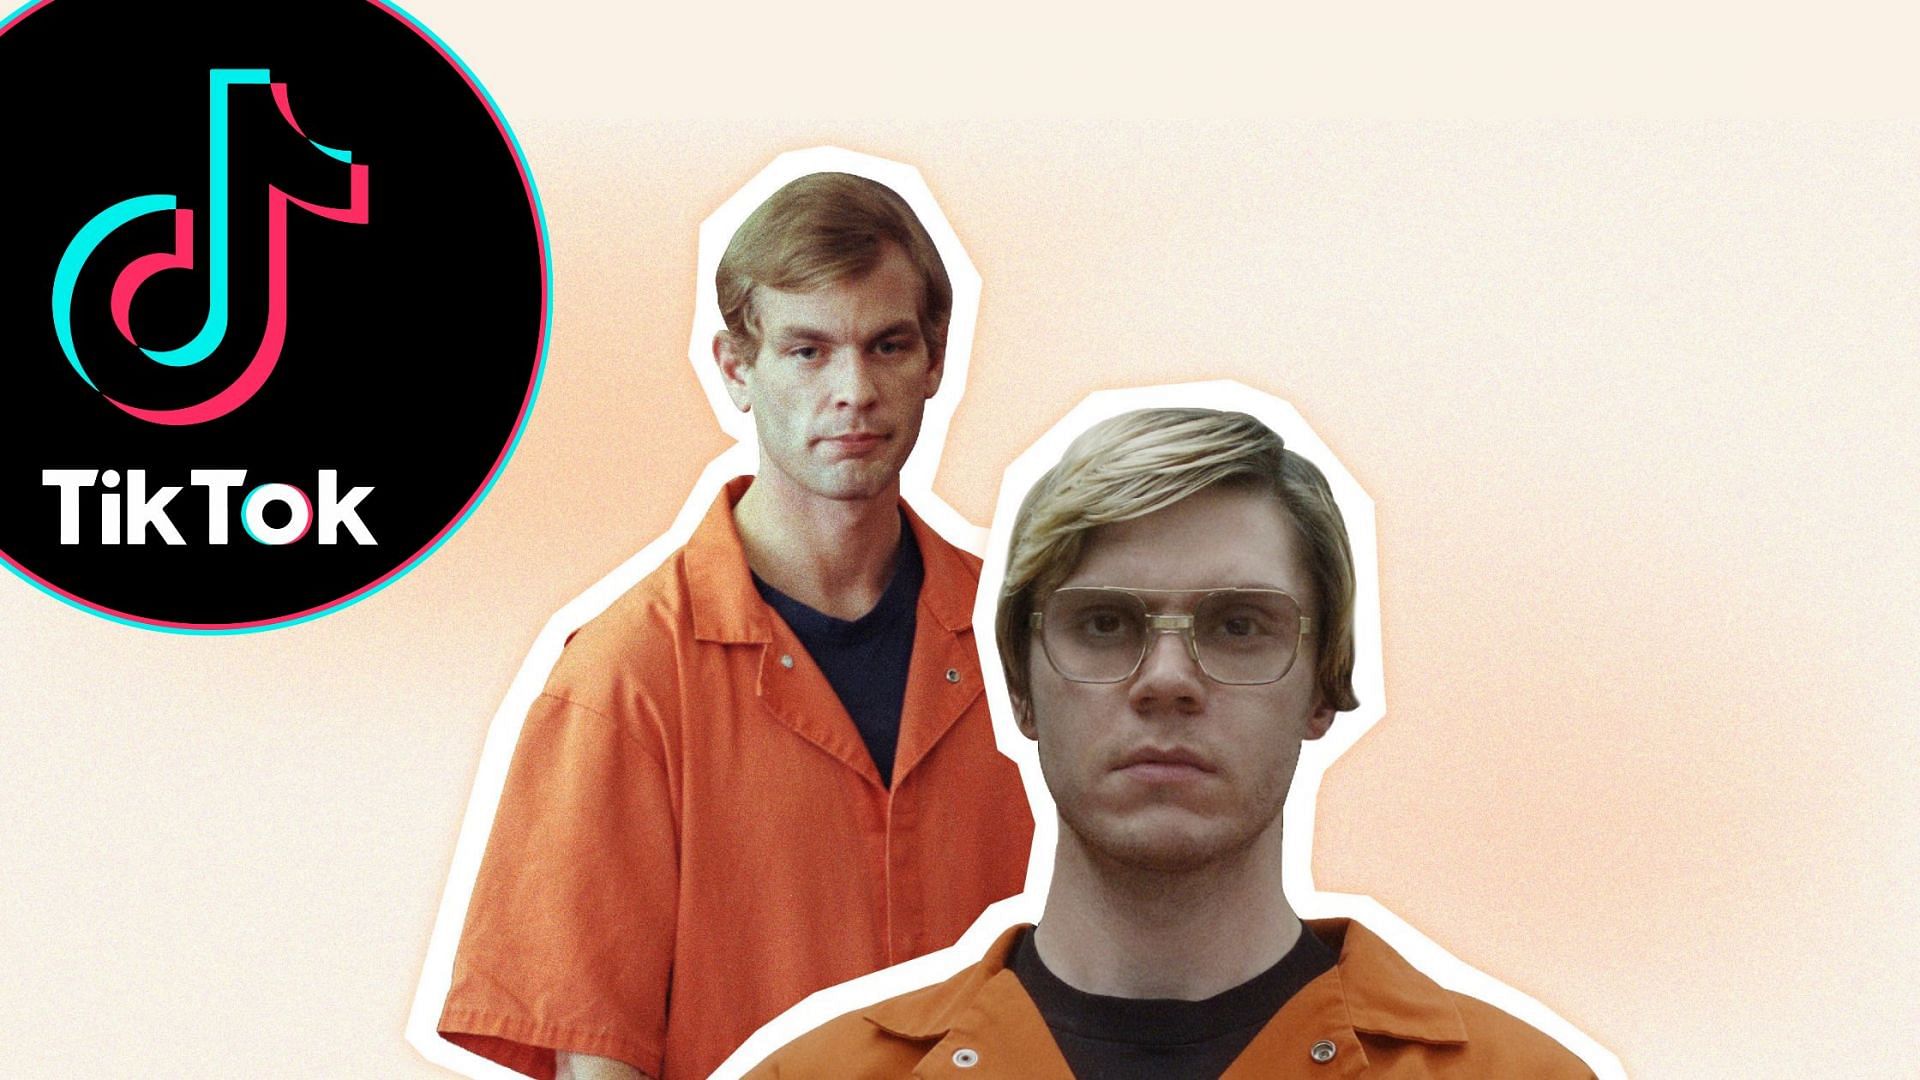 Twitter users urge others not to participate in Jeffrey Dahmer trends (image via Netflix)